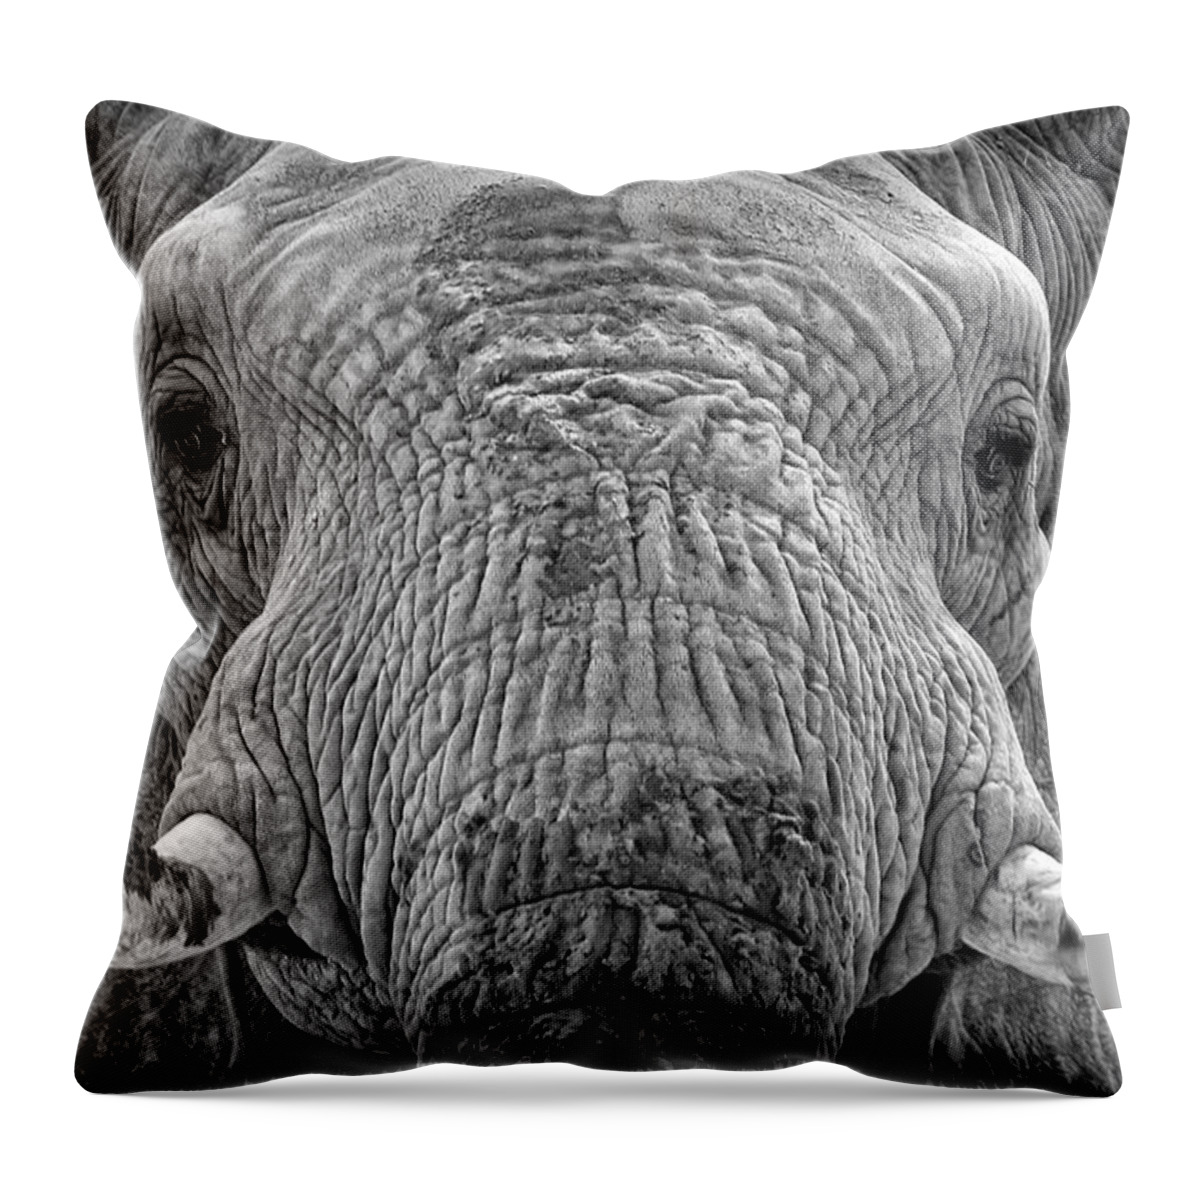 Elephants Throw Pillow featuring the photograph Mabu Up Close N Personal by Elaine Malott